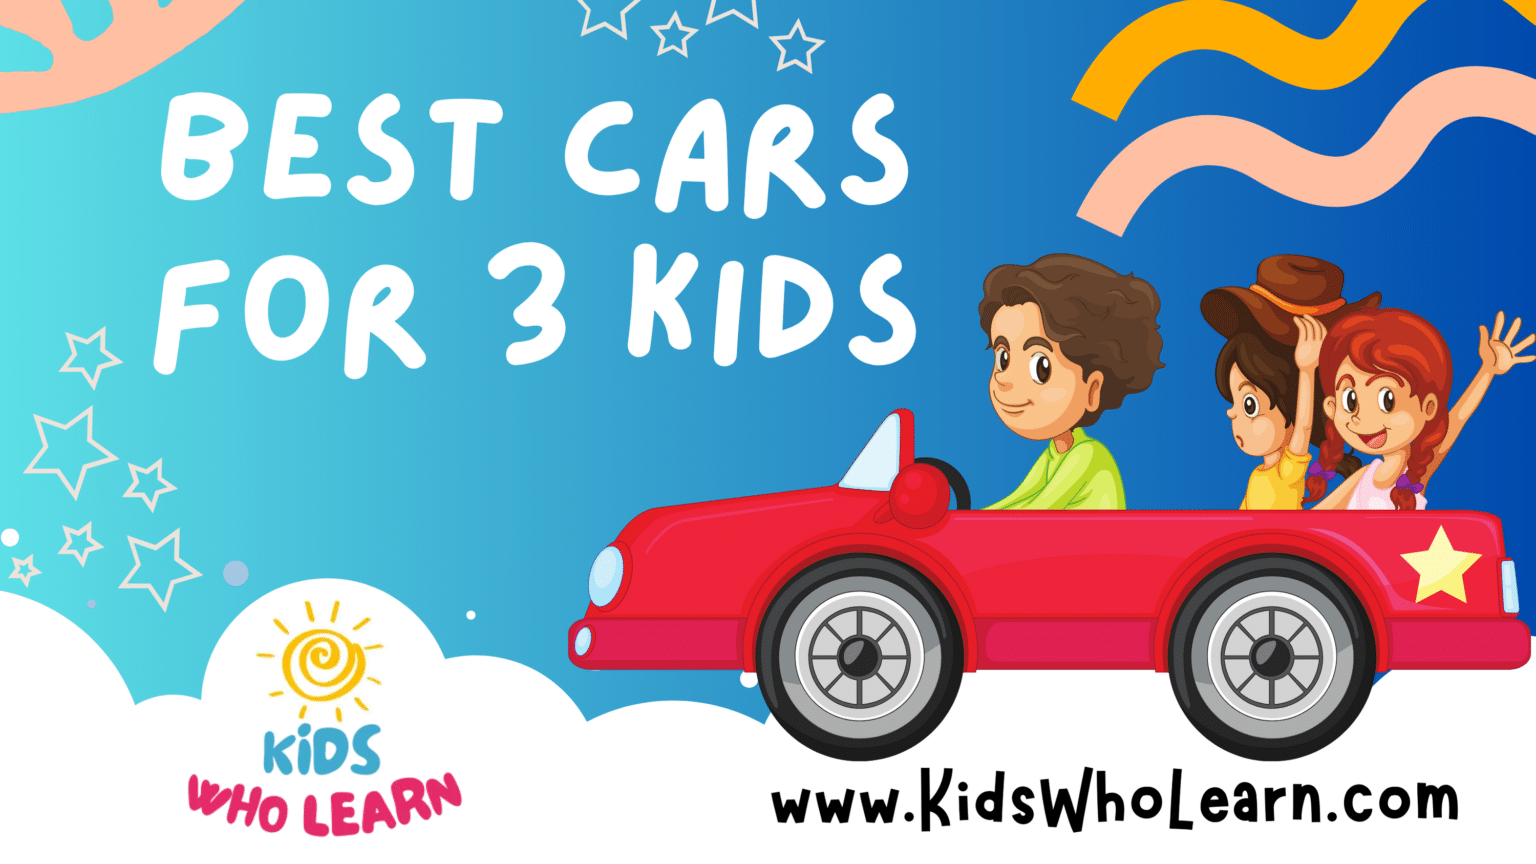 Best Cars For 3 Kids